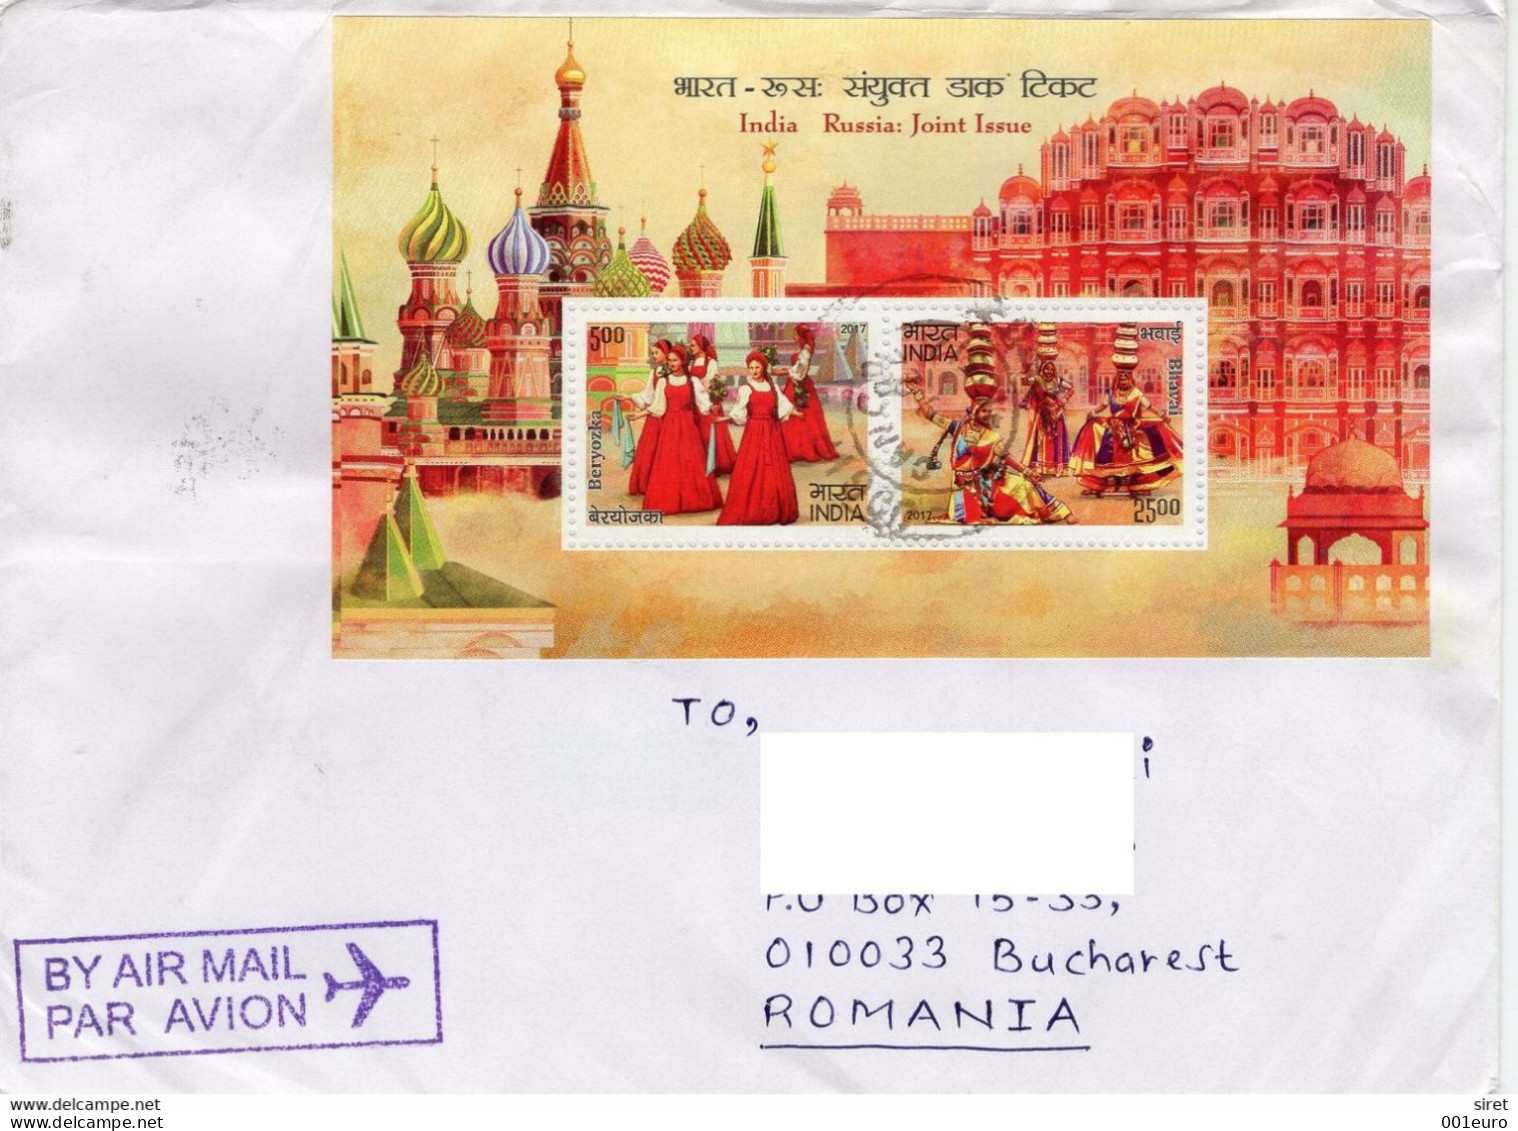 INDIA 2022: JOINT ISSUE INDIA - RUSSIA, Circulated Cover Item N° #1634686340 - Registered Shipping! - Gebraucht